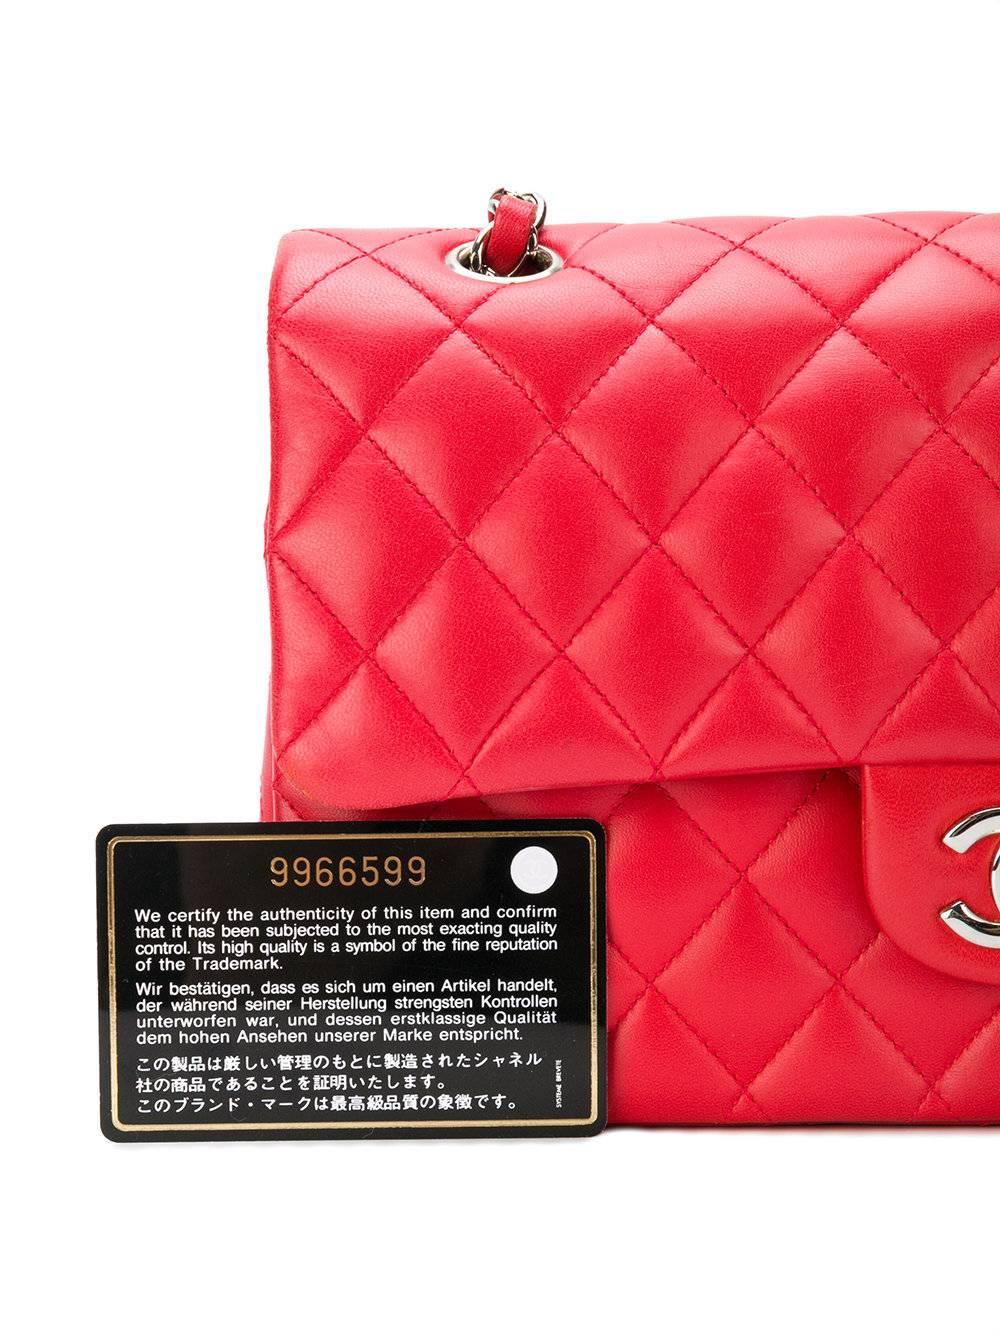 This iconic Chanel double flap shoulder bag was fashioned from smooth red lambskin, finished with a diamond quilt detail, one of the most iconic trademarks of the Maison. It features a leather shoulder strap, adorned with a silver-tone chain, and